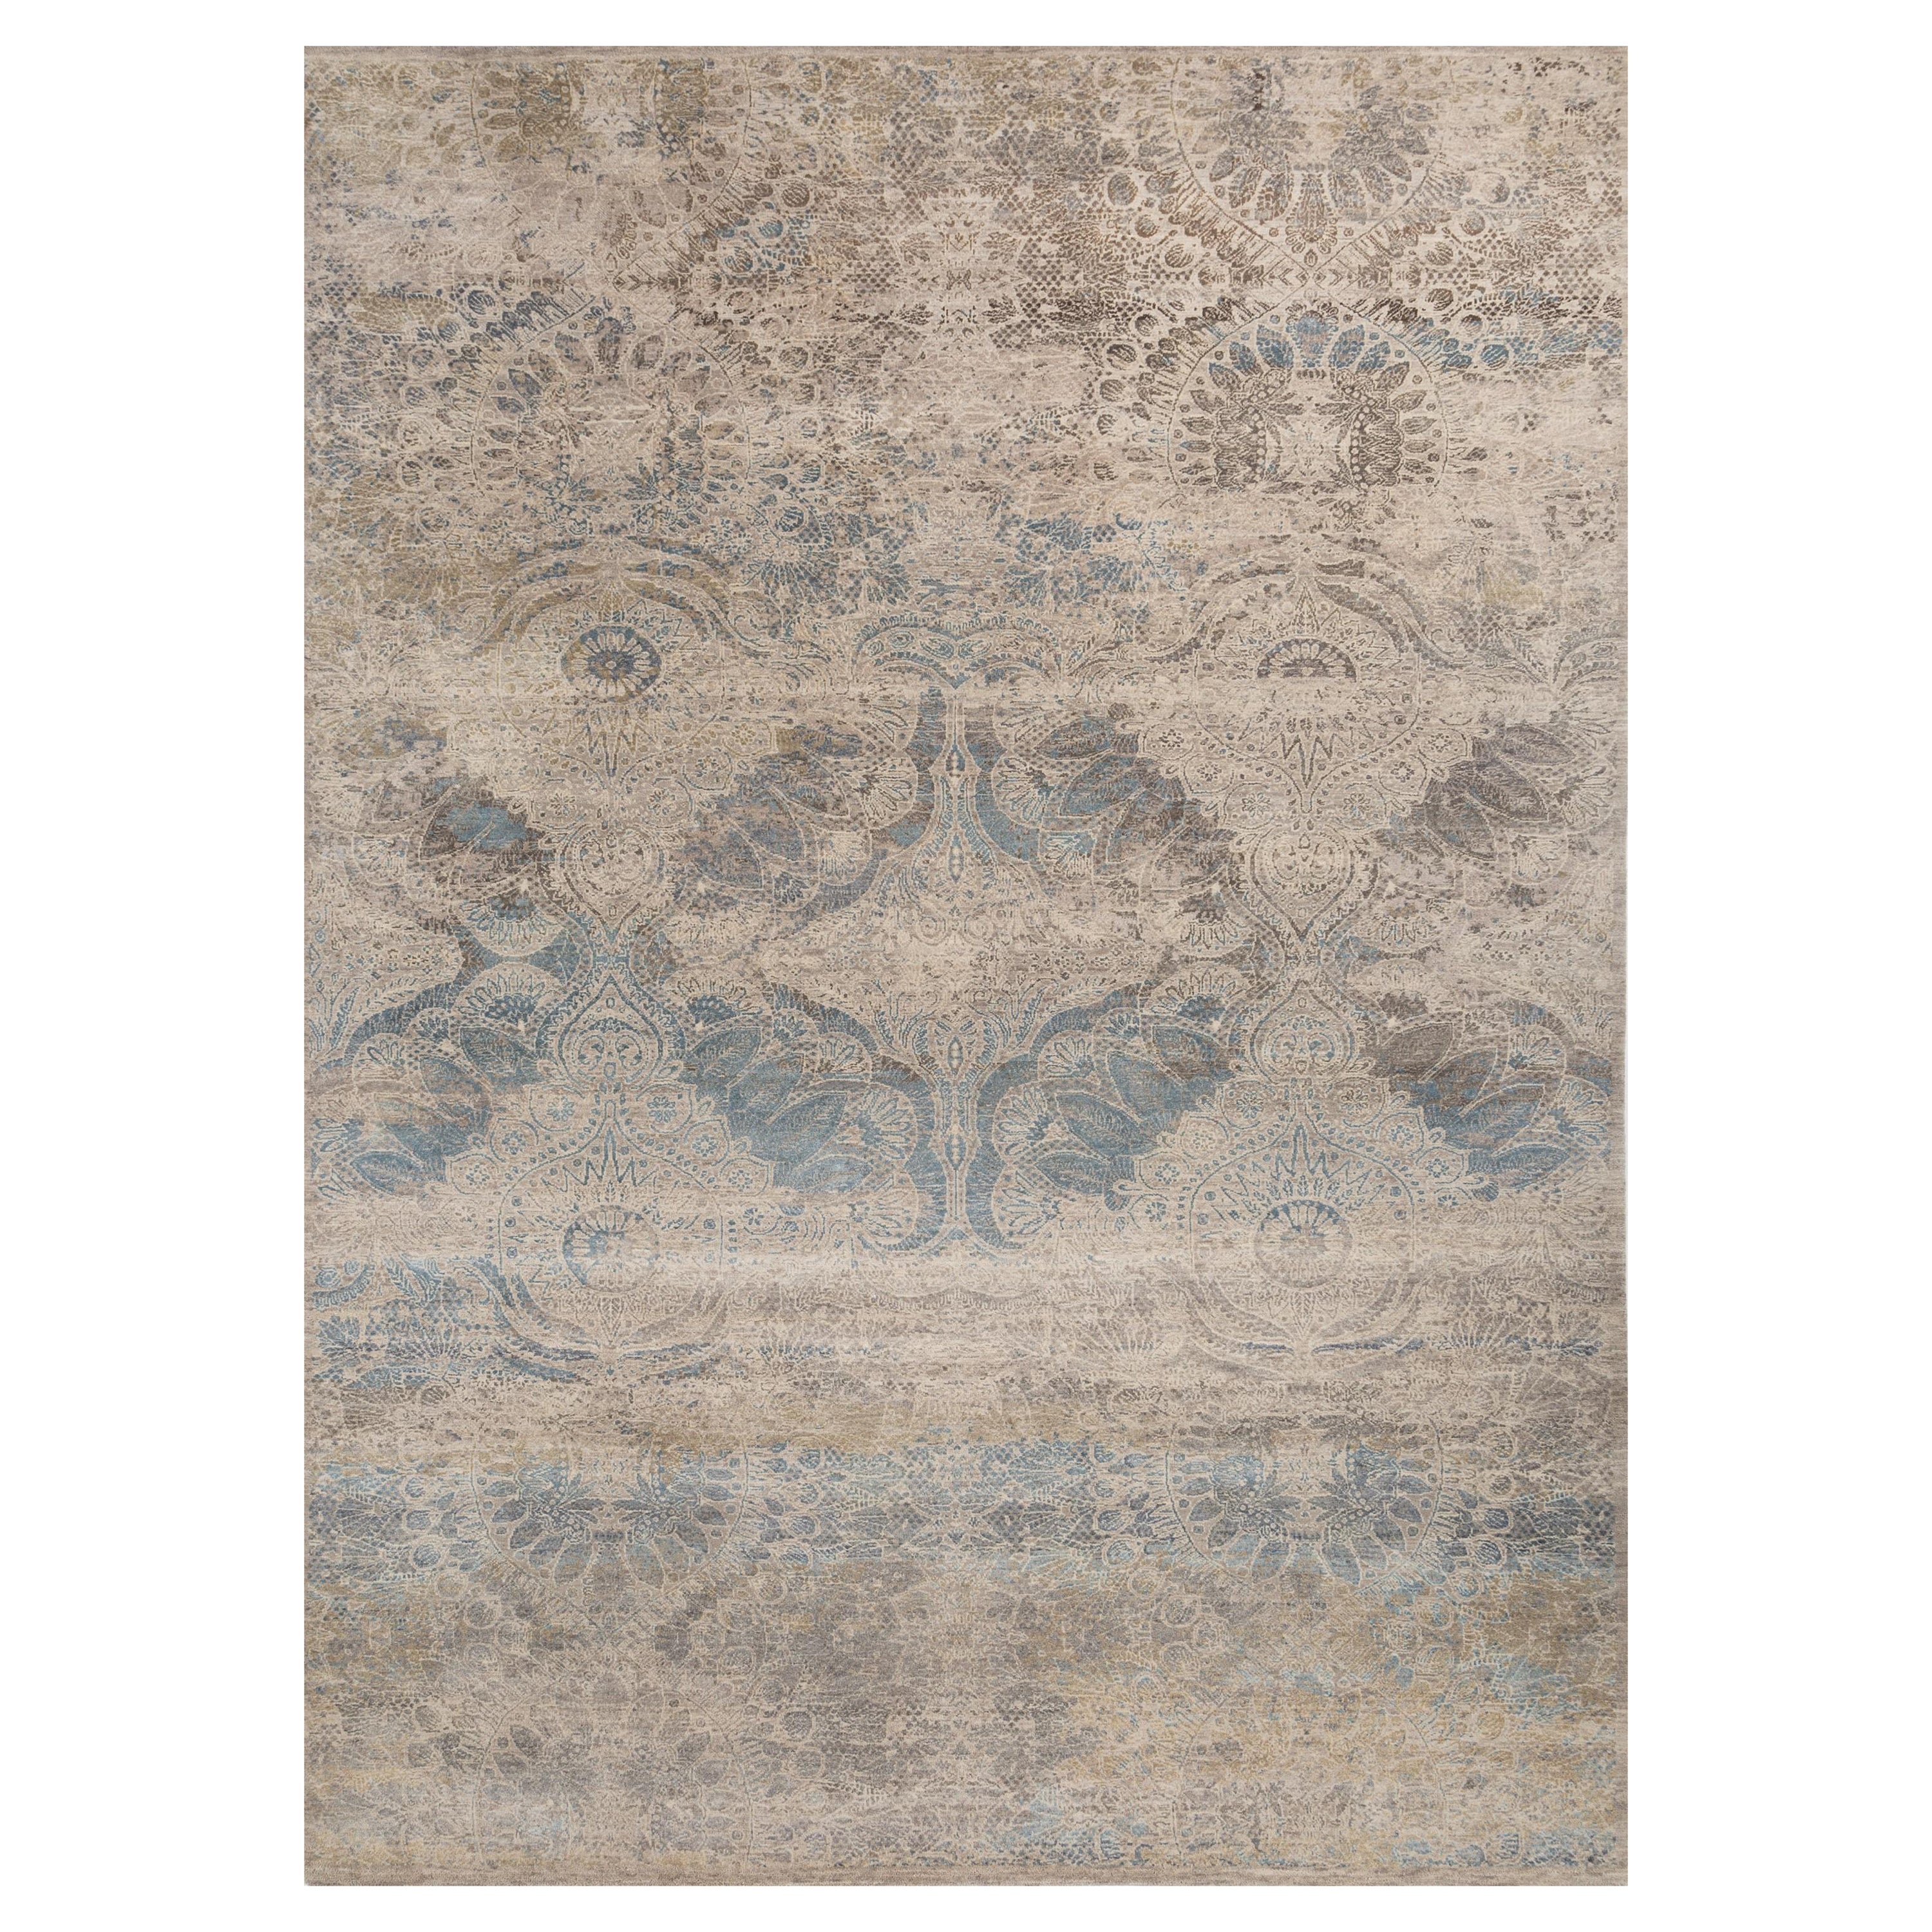 Timeless bloom classic gray & linen white 195X295 cm handknotted rug